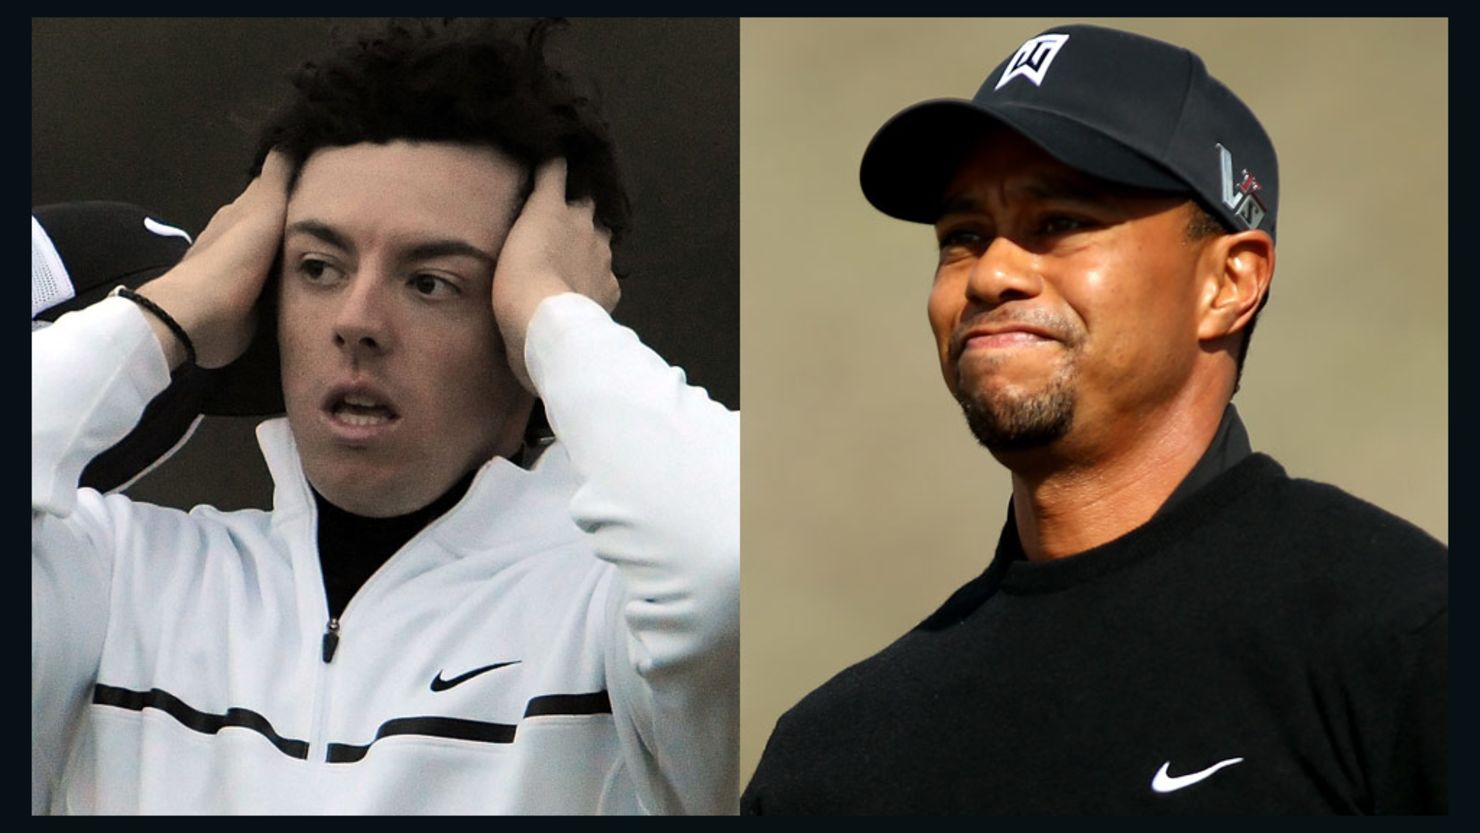 The world's top two golfers, Rory McIlroy (L) and Tiger Woods suffered first round defeats in Arizona